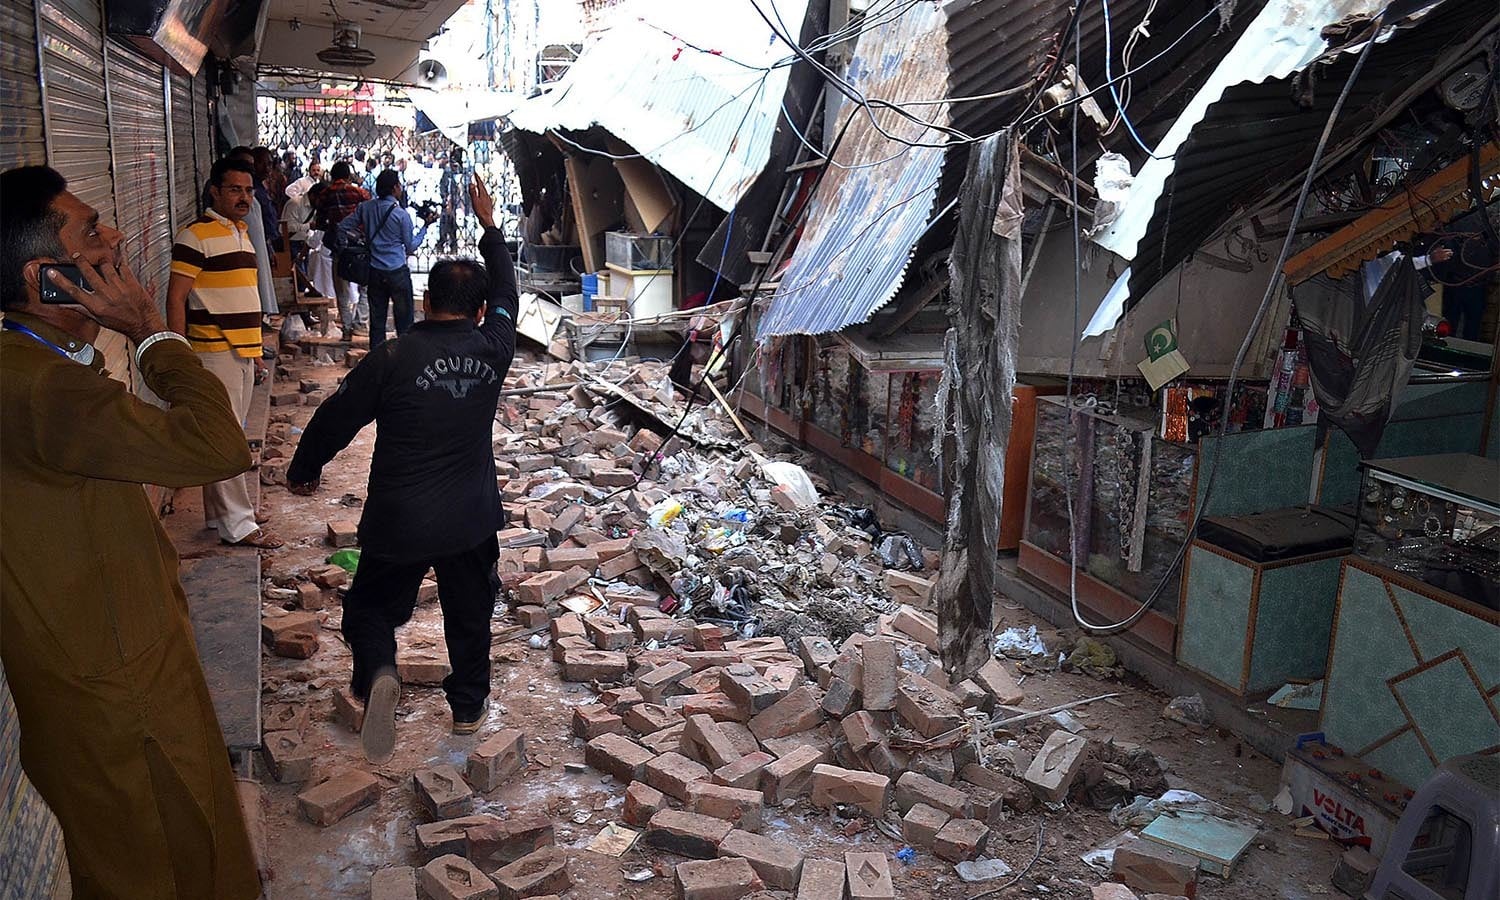 Pakistani residents gather at a damaged market following an earthquake in Sargodha on October 26, 2015. A powerful 7.5 magnitude earthquake killed at least 70 people as it rocked south Asia, including 12 Afghan girls crushed to death in a stampede as they tried to flee their collapsing school. Thousands of frightened people rushed into the streets in Afghanistan, Pakistan and India as the quake shook a swathe of the subcontinent. AFP PHOTO / SHAHID BUKHARI